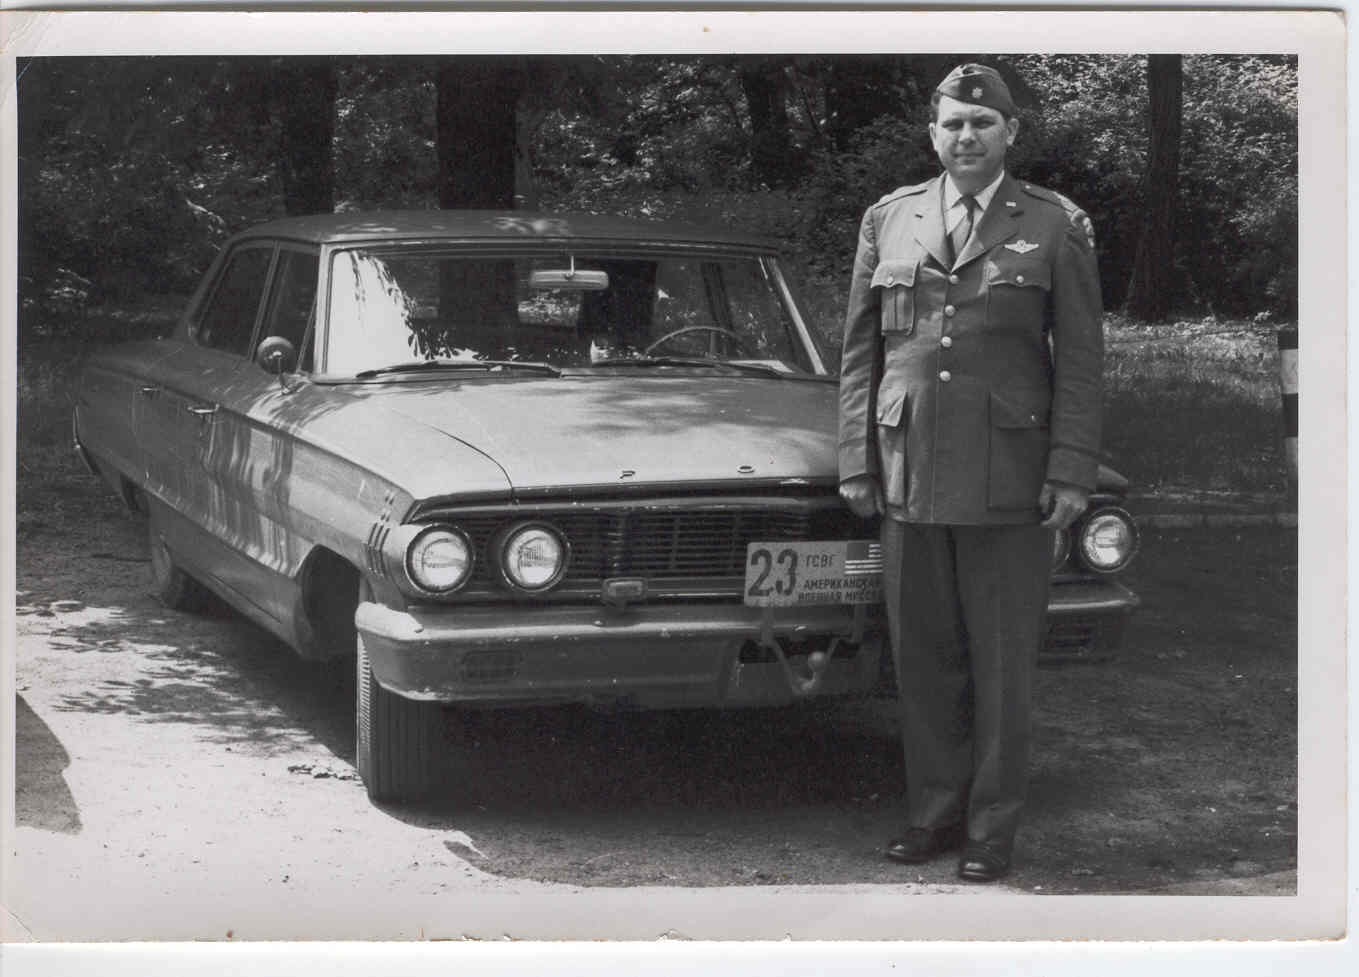 <span style="font-size:18px; ">&nbsp;1962-63 &nbsp;Somewhere in the Zone, my father with &ldquo;his&rdquo; car. &nbsp;My father was very proud of this car. &nbsp;He helped design it with the manufacture and had it air shipped via C47, I believe, to Germany - for&nbsp;what would have been in their day a new &nbsp; hot rod to take the road at high speeds at night. &nbsp;His driver was Mel Ratz.<br />Photo provided by Anne-Marie Fitzurka Cooper</span>